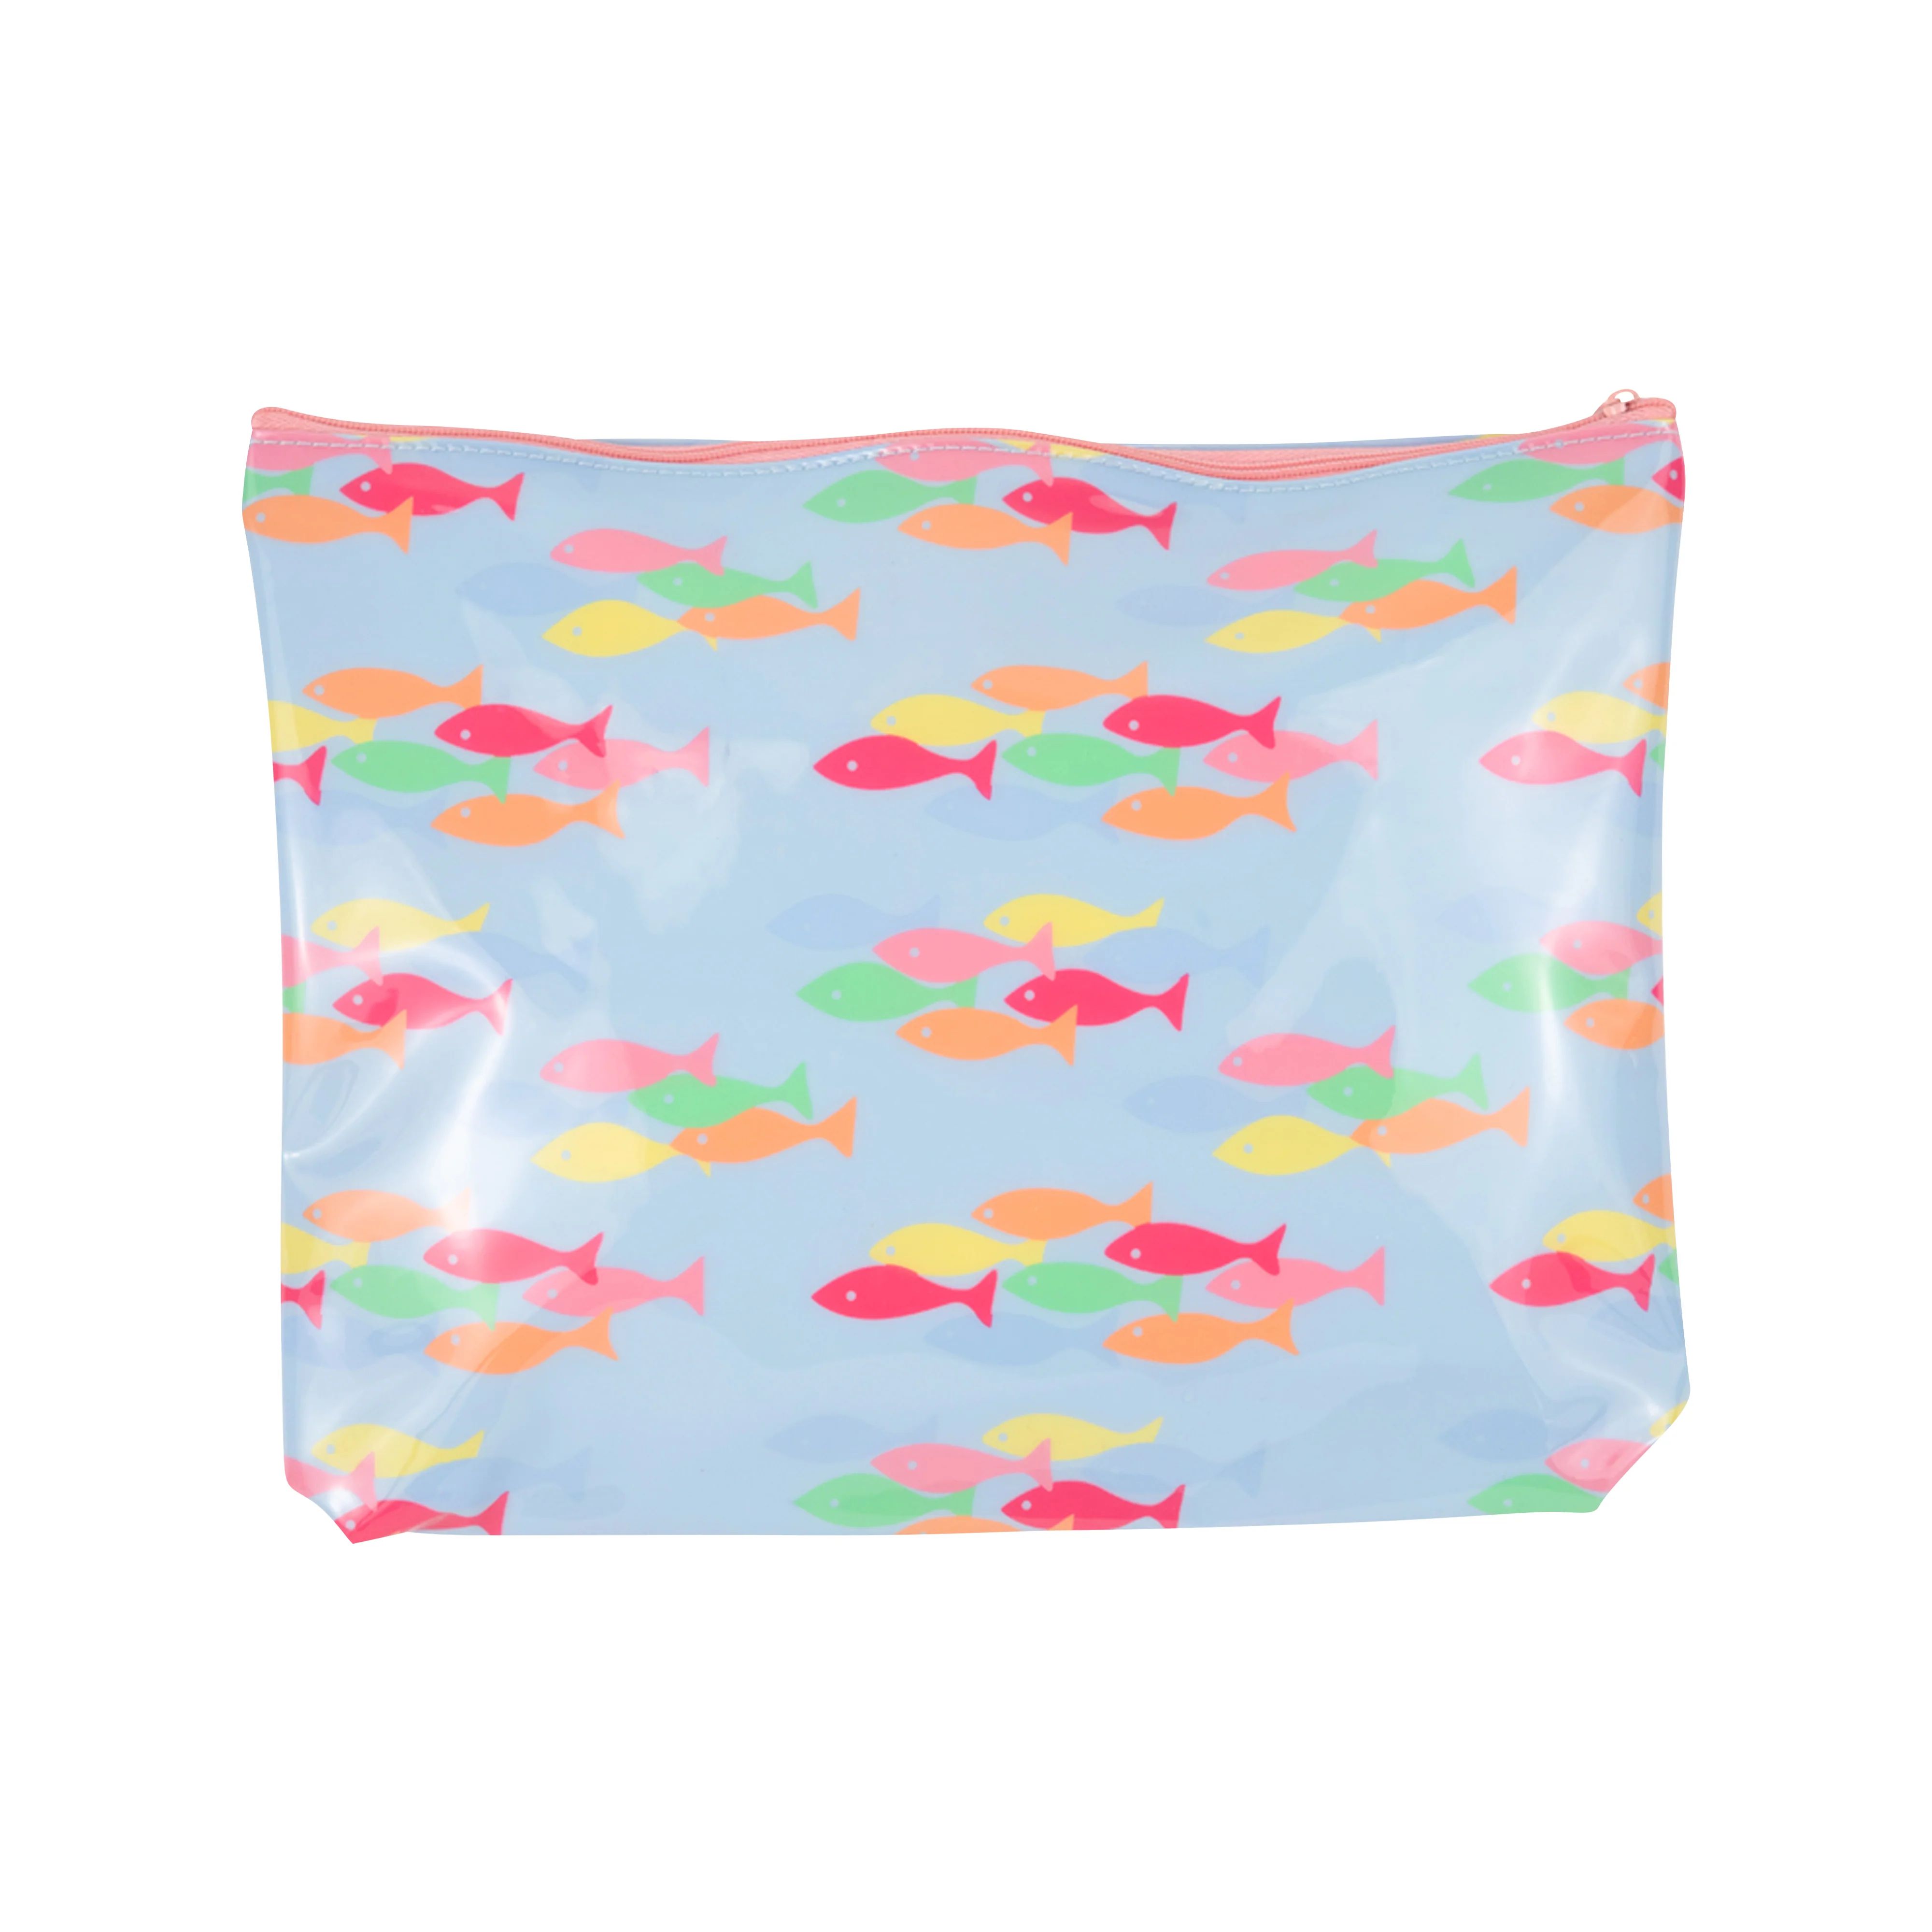 Duchess Ditty Bag - French Leave Fishies with Hamptons Hot Pink | The Beaufort Bonnet Company